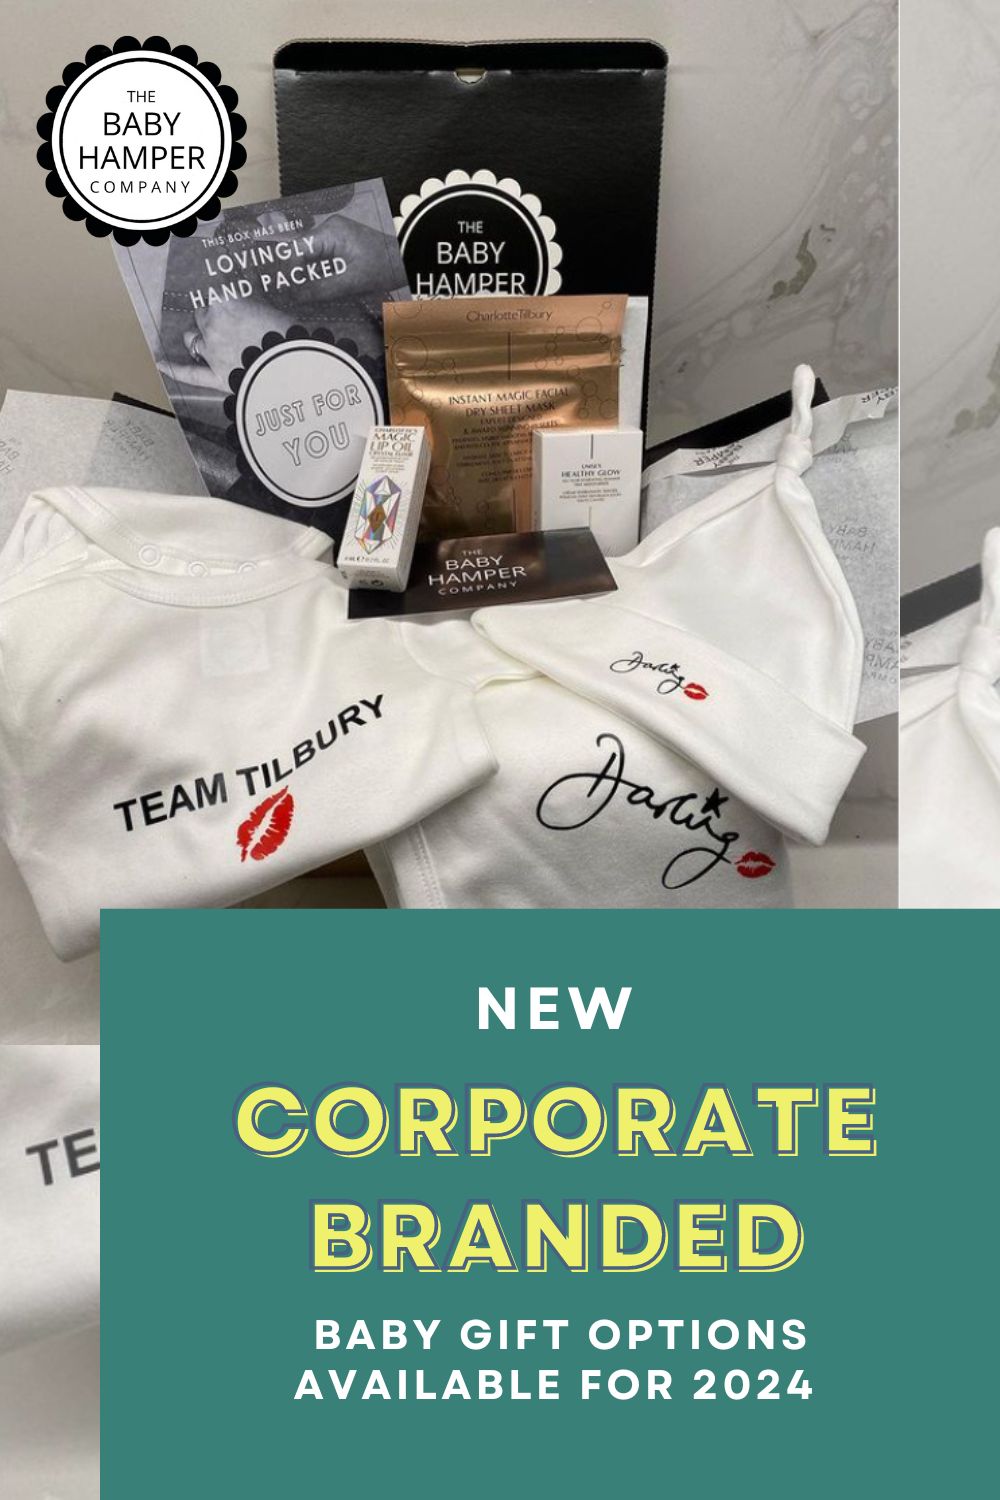 New Corporate Branded Baby Gift Options Available for 2024